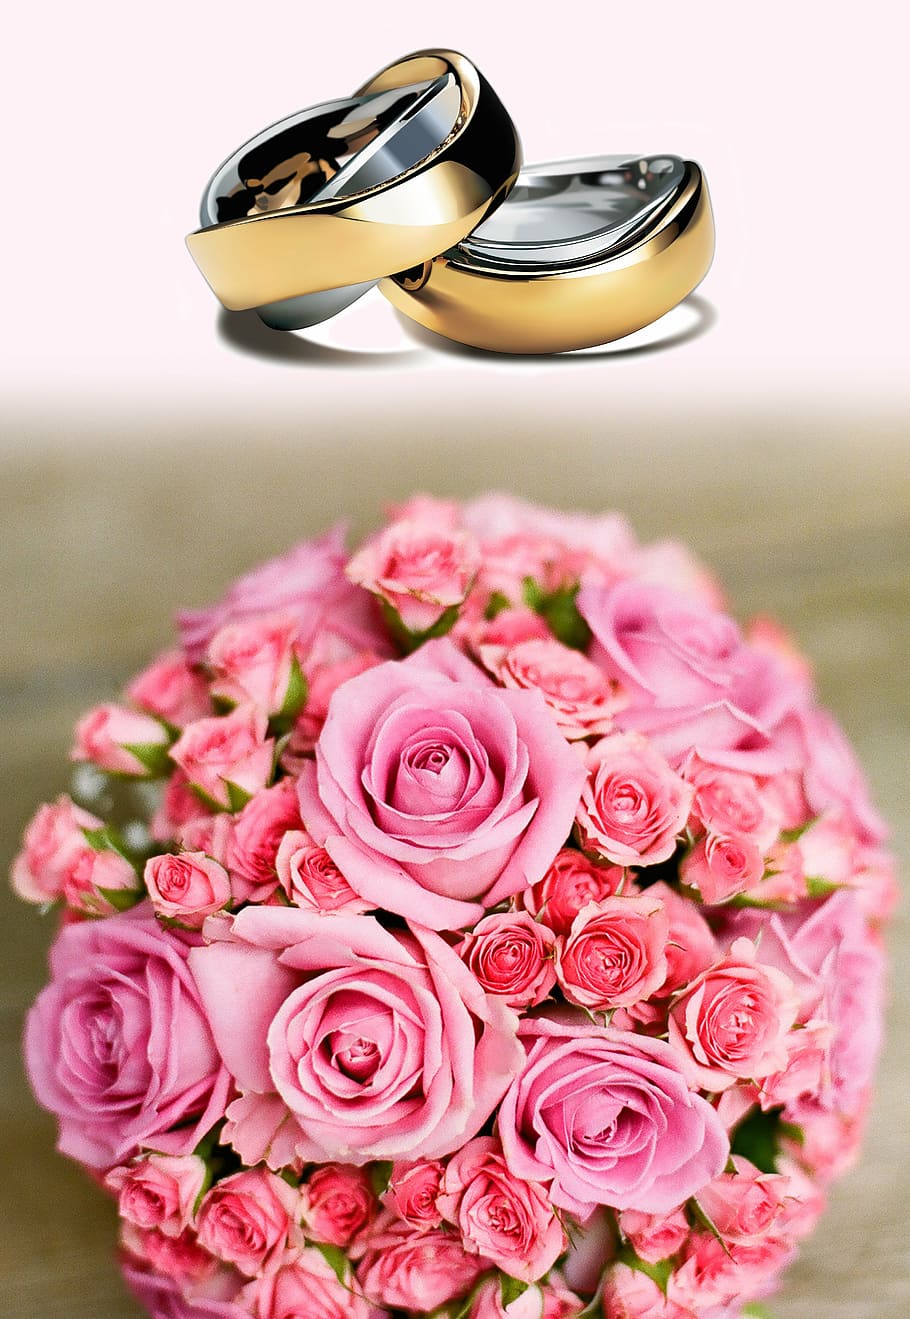 two, gold-colored wedding ring, bouquet, rose, wedding rings, wedding, love, marry, gold, platinum